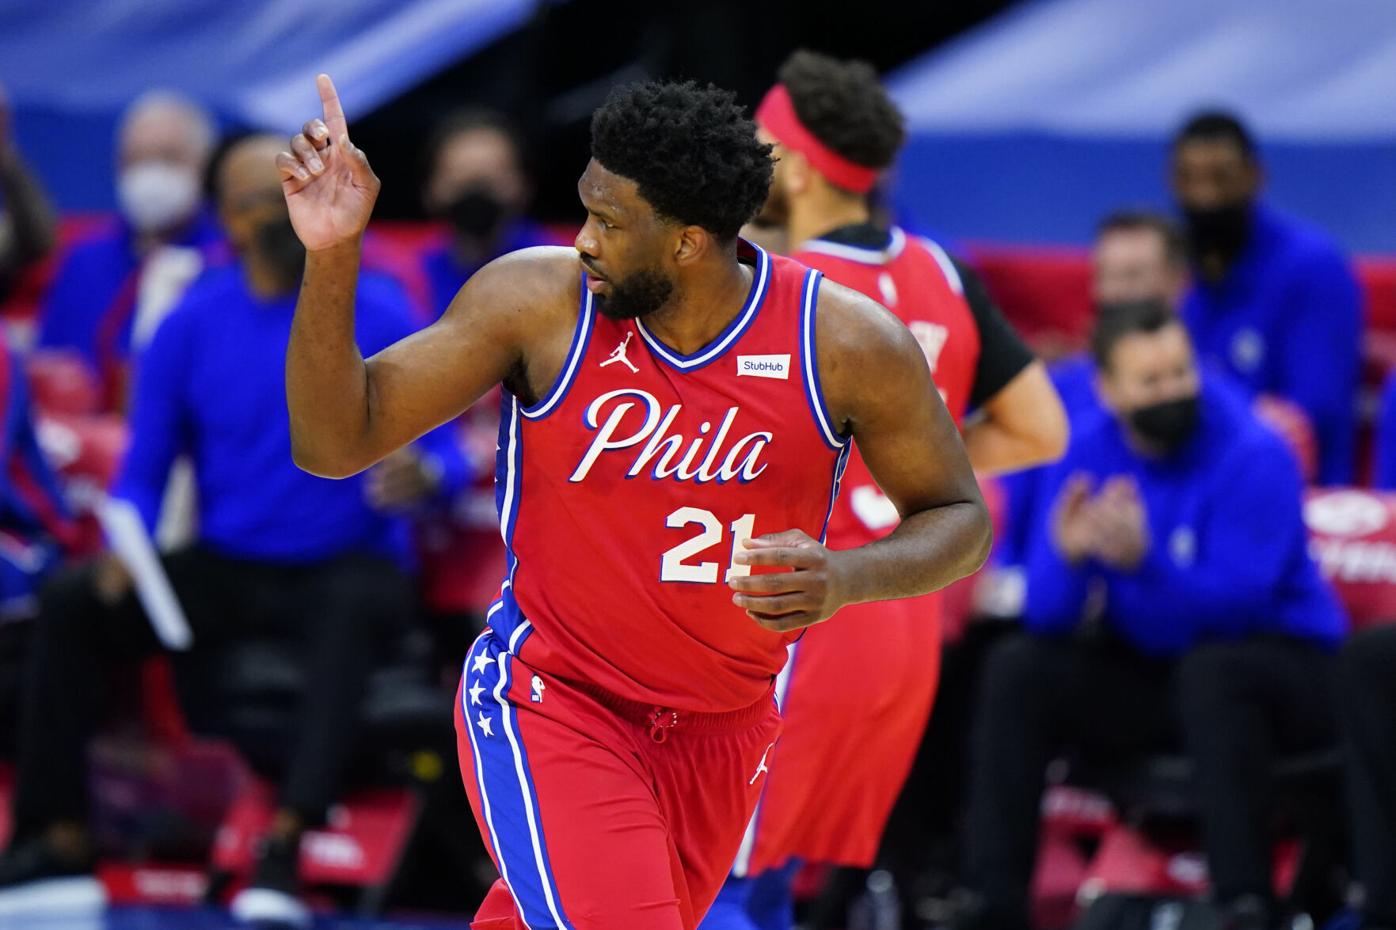 At last, the Hall of Fame gets defensive and welcomes Sixers great